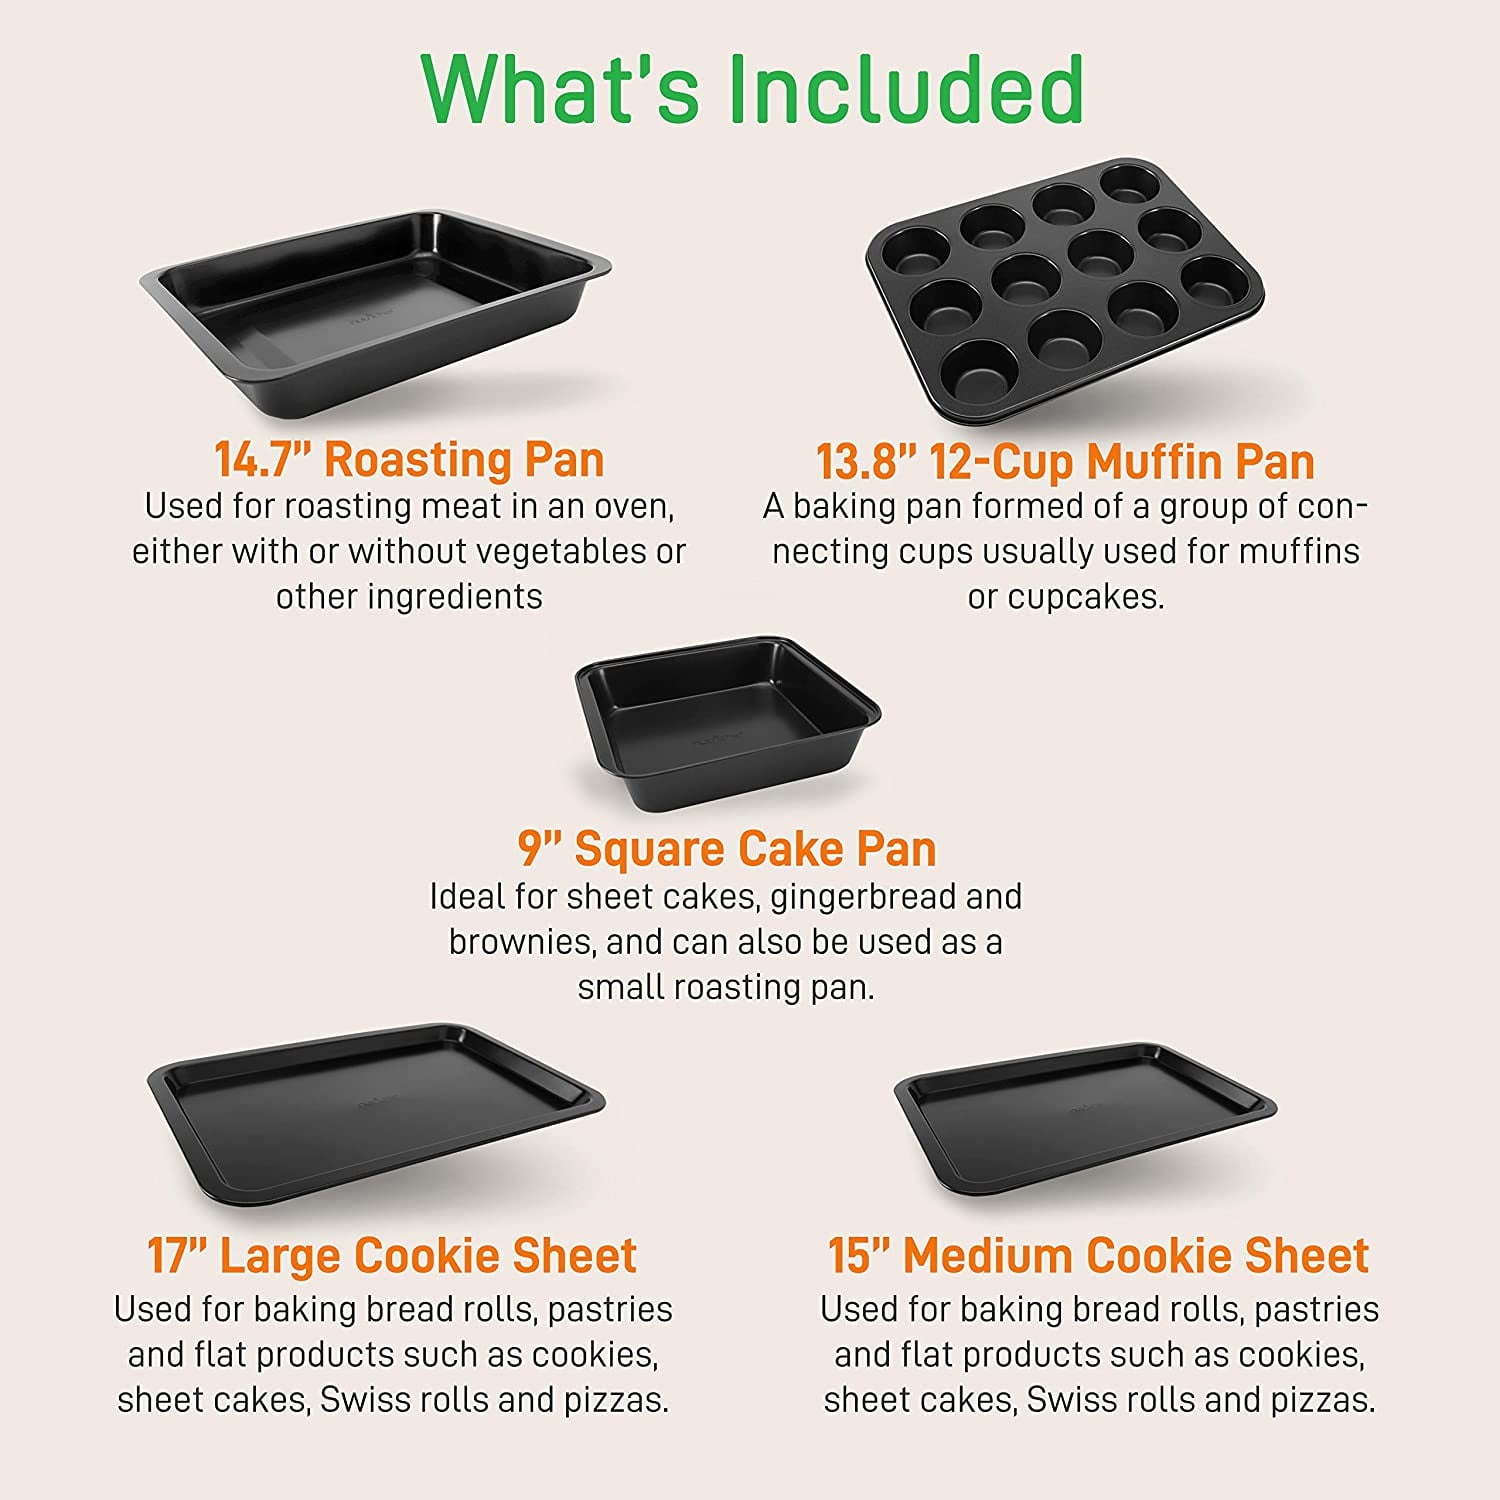 Nutrichef 10-Piece Nonstick Bakeware Set - PFOA, Pfos, PTFE-Free Carbon Steel Baking Trays w/Heatsafe Silicone Handles, Oven Safe Up to 450°F